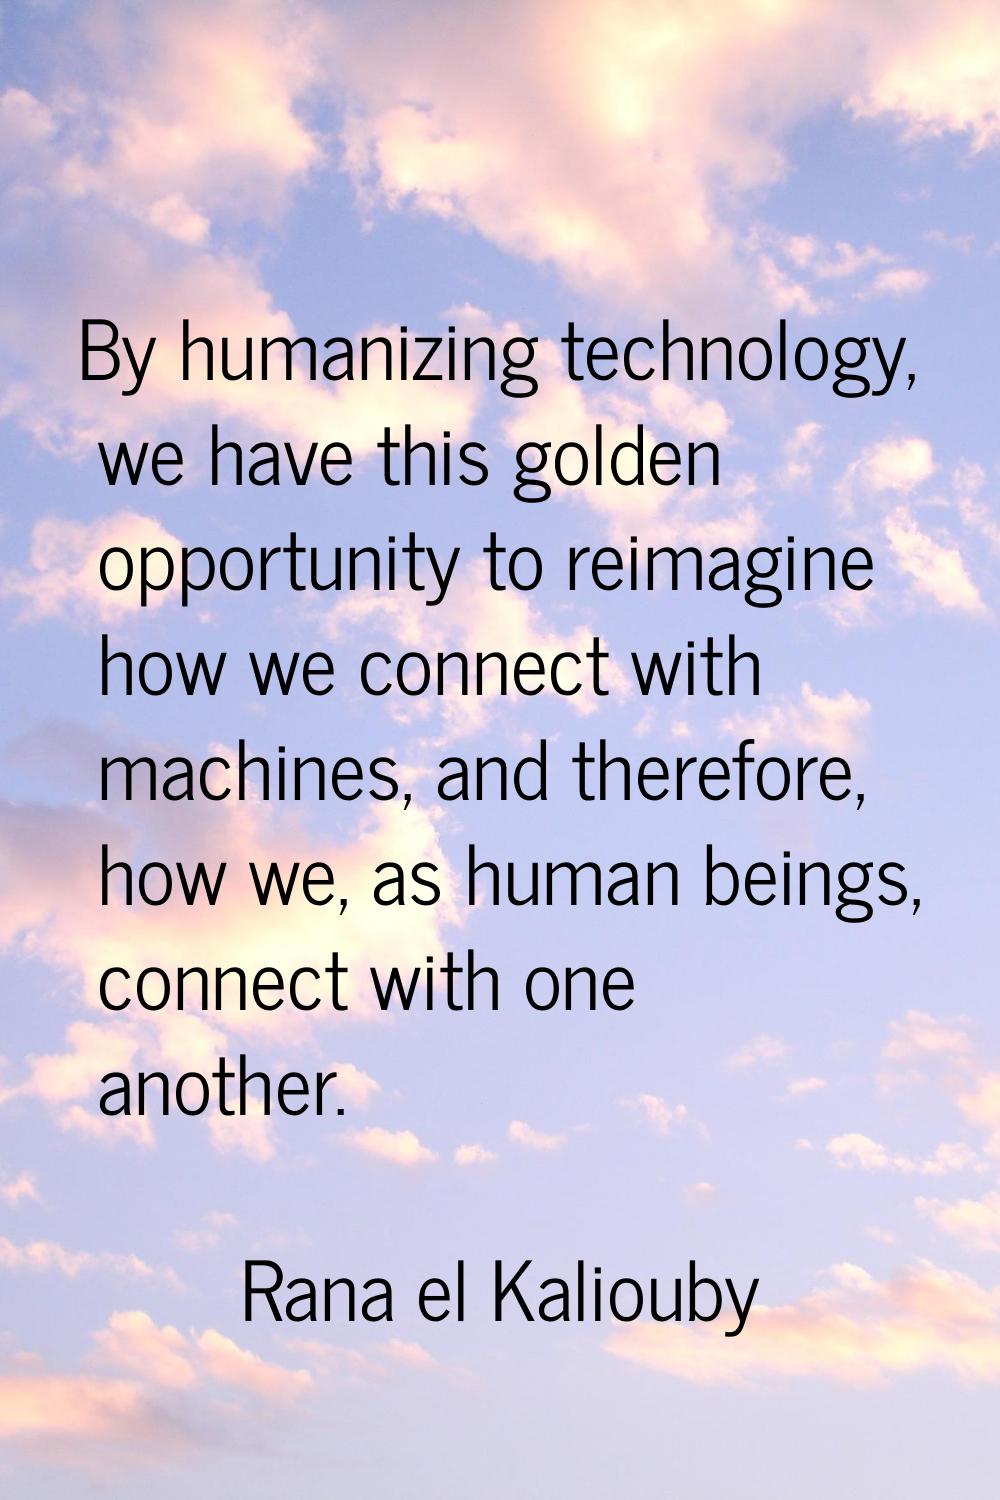 By humanizing technology, we have this golden opportunity to reimagine how we connect with machines